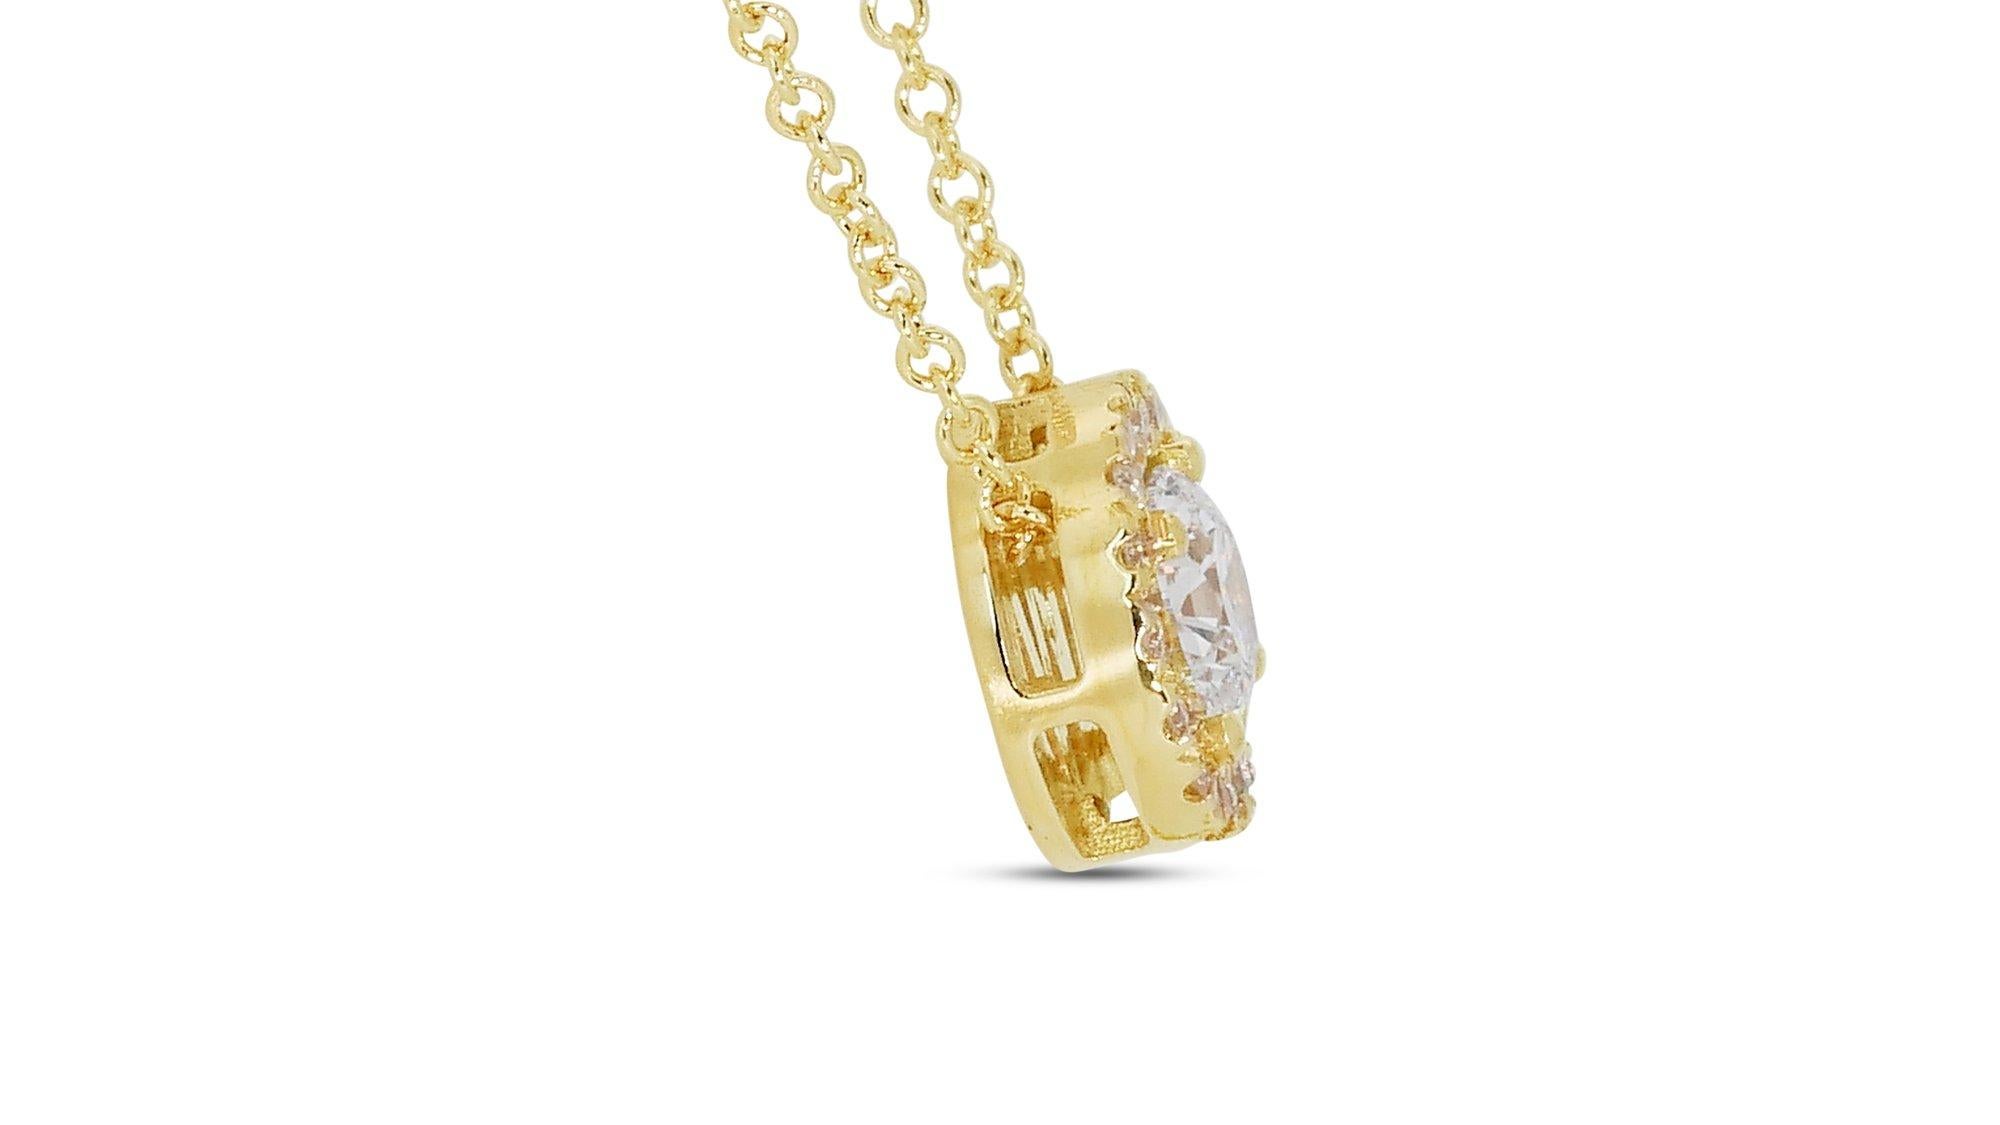 Brilliant Cut Exquisite 18k Yellow Gold Natural Diamond Halo Necklace w/0.85 ct - GIA Certfied For Sale